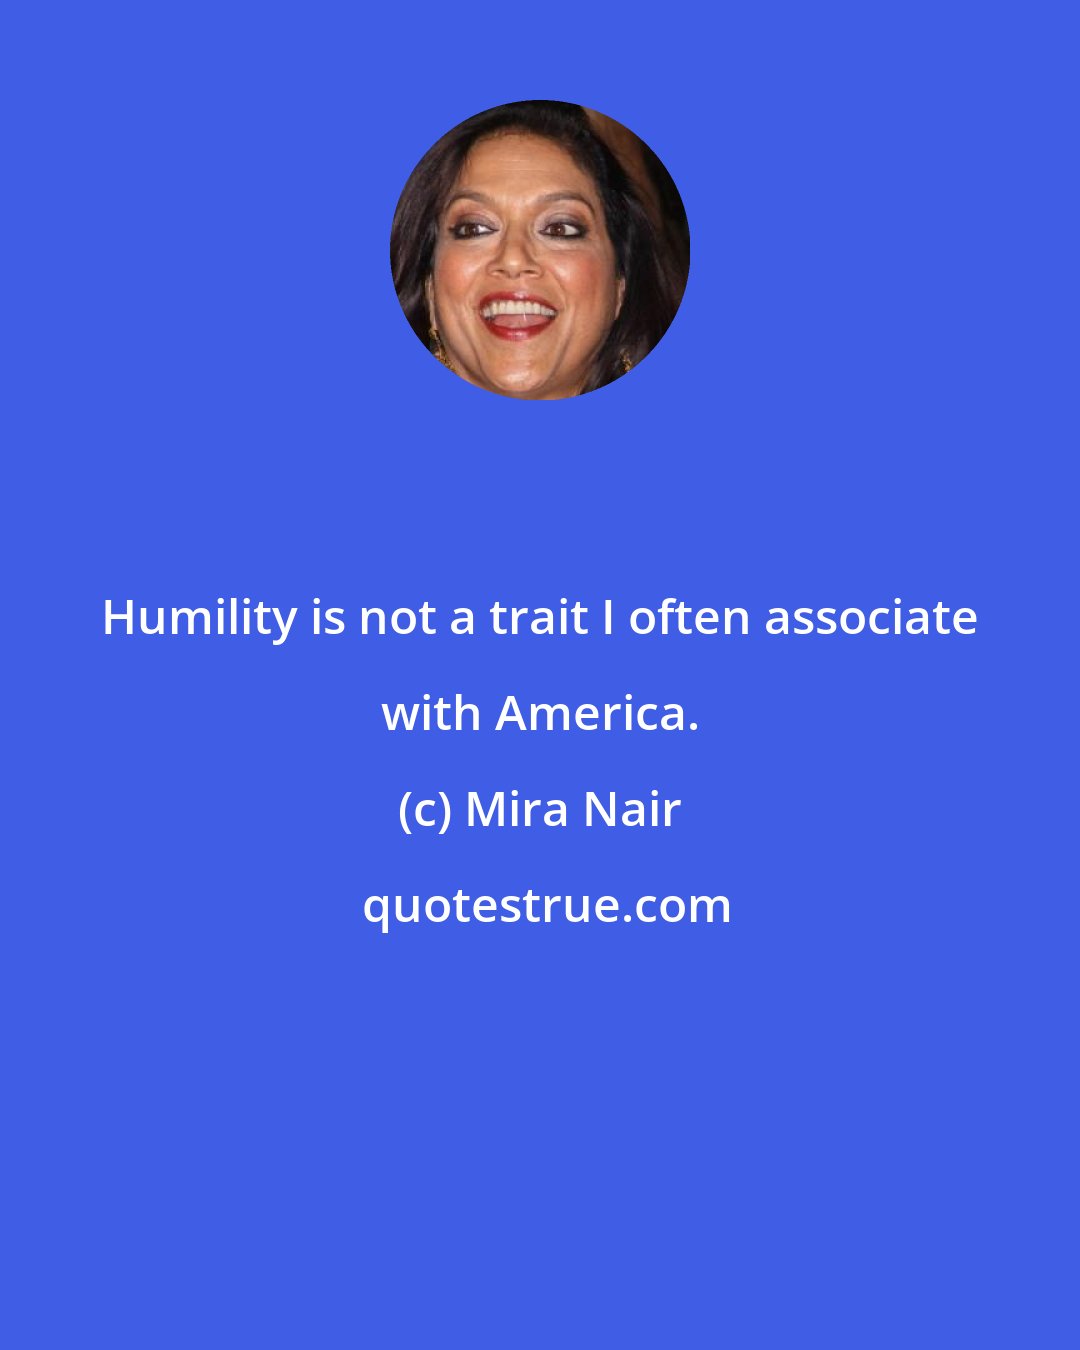 Mira Nair: Humility is not a trait I often associate with America.